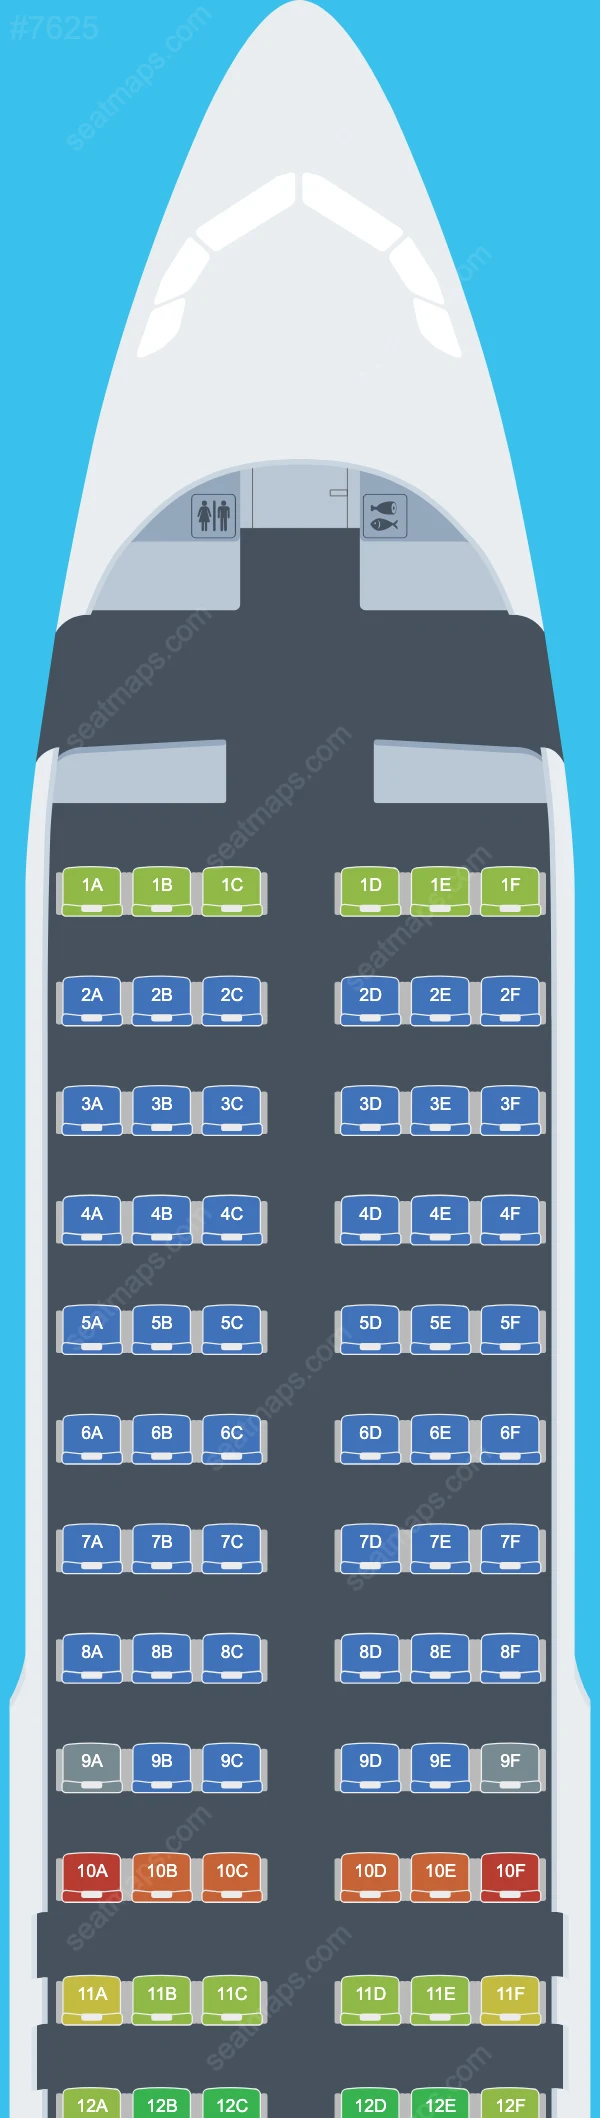 Eurowings Europe Airbus A320 Seat Maps A320-200 V.1